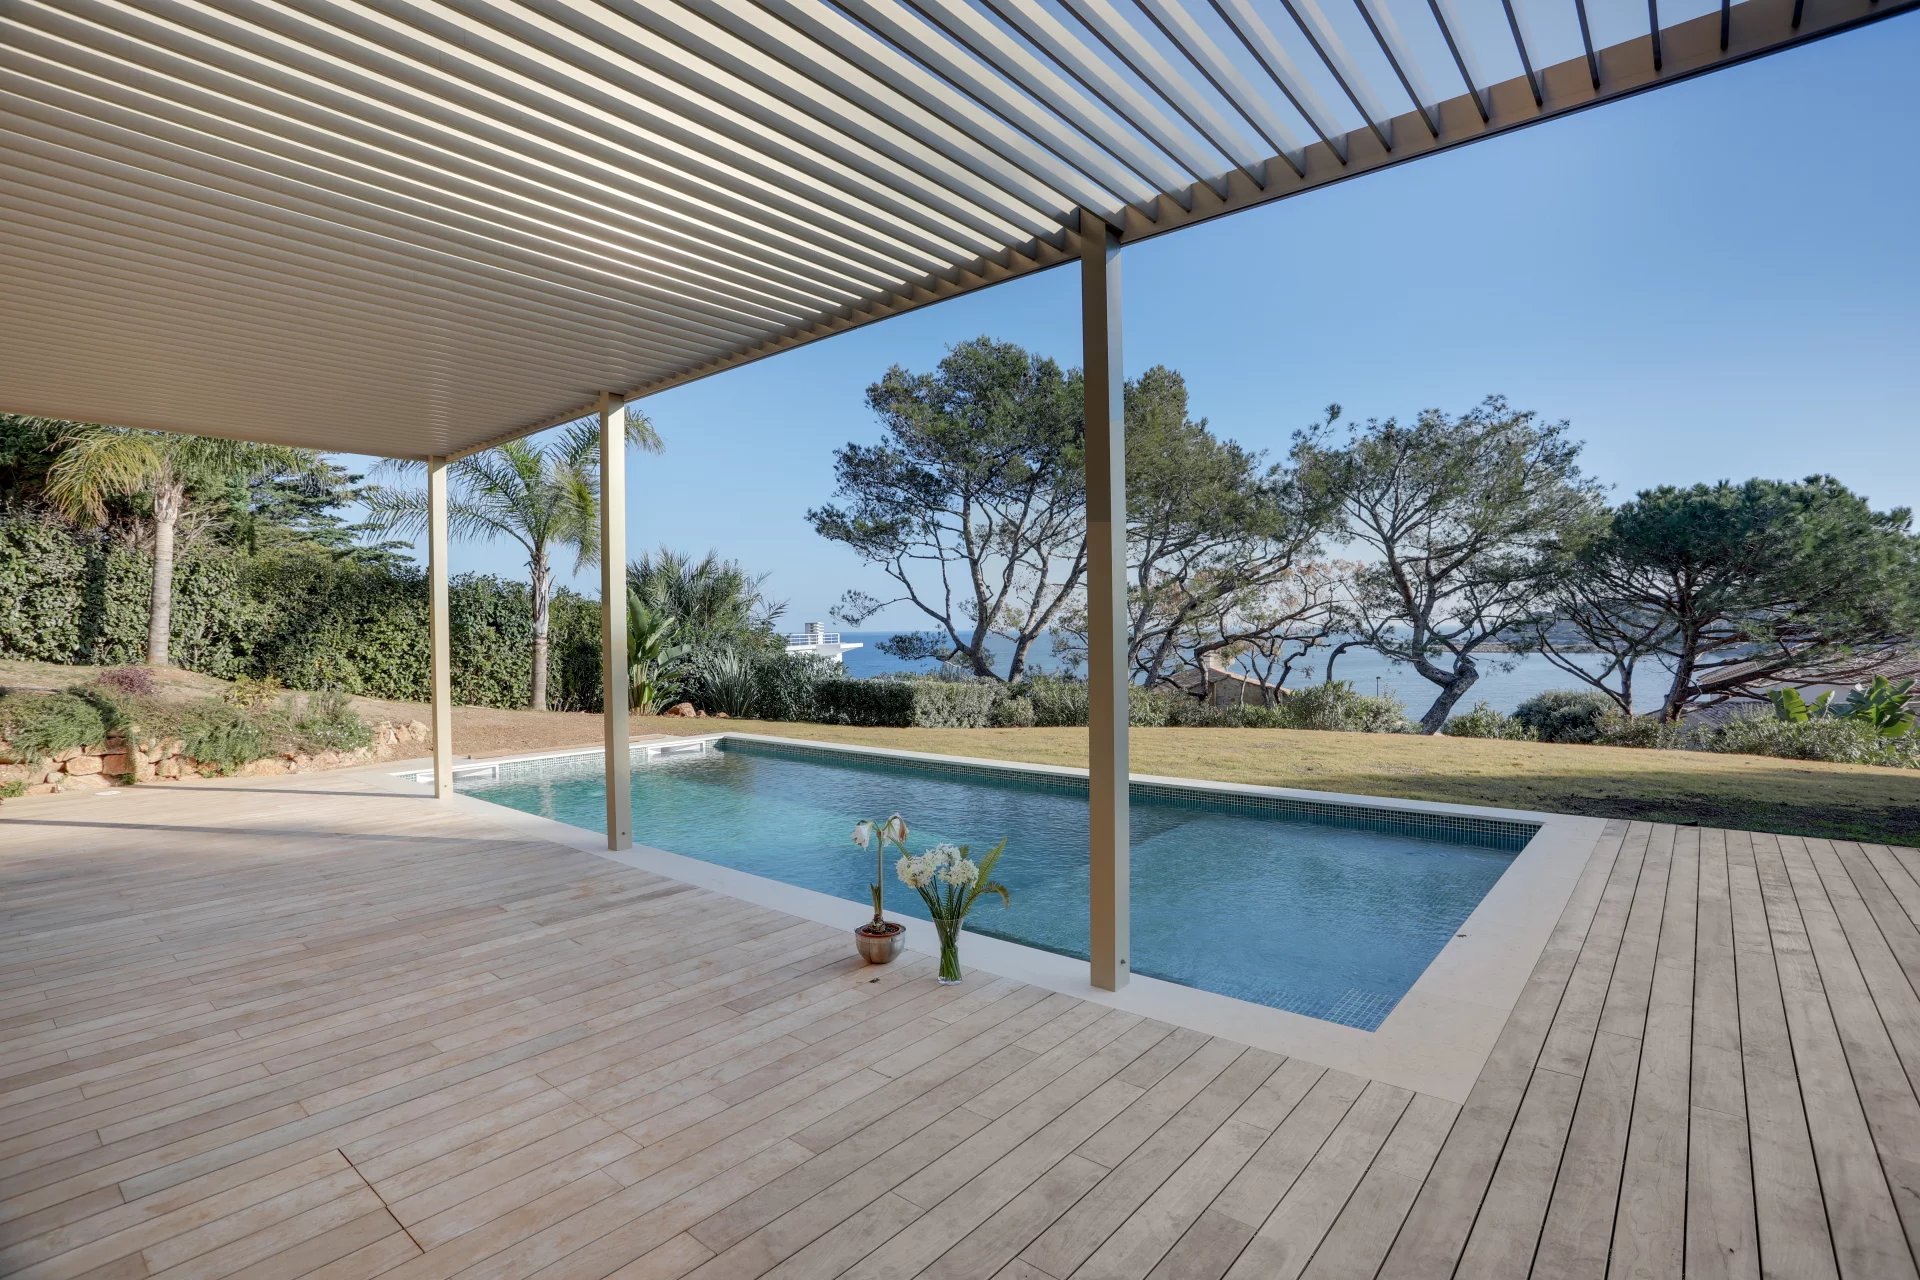 CAP D'ANTIBES BRAND NEW VILLA WITH SEA VIEW